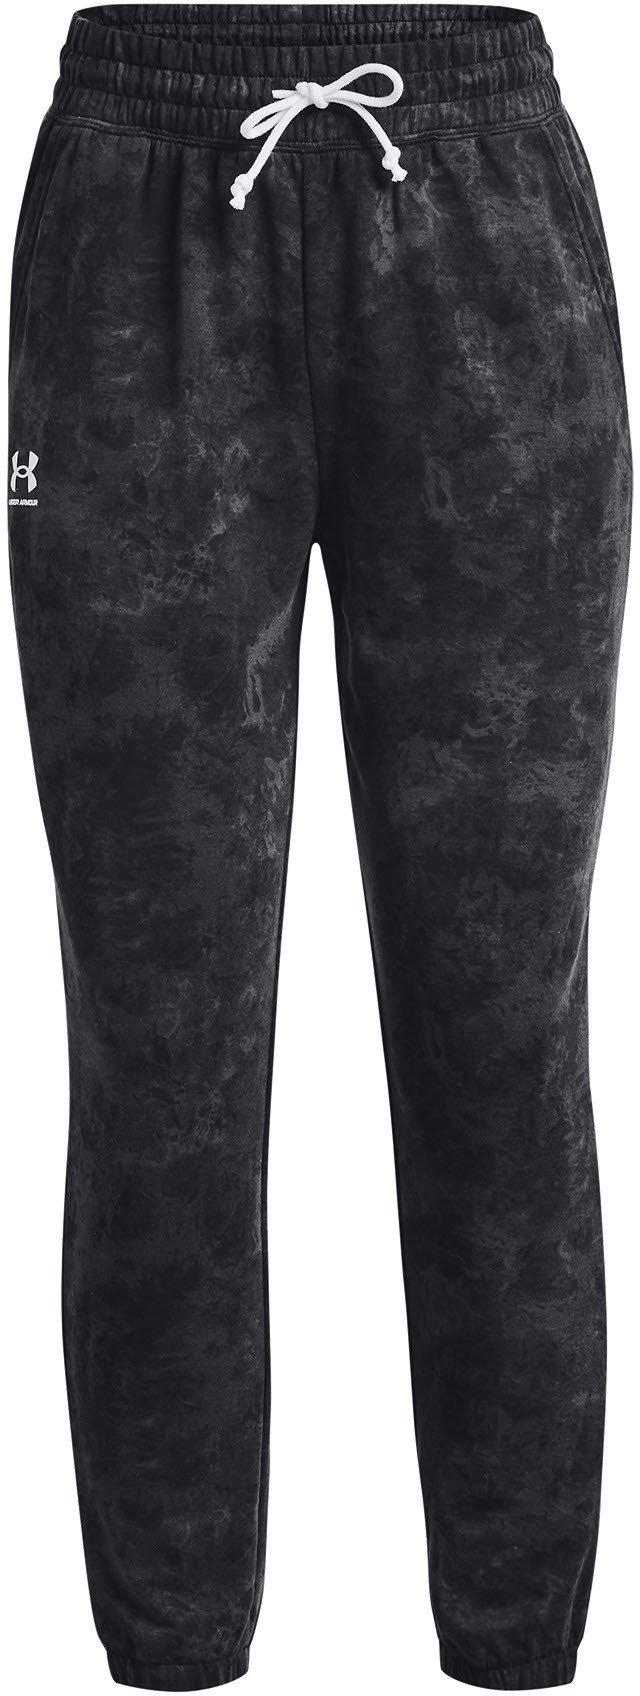 Under Armour Rival Terry Print Jogger